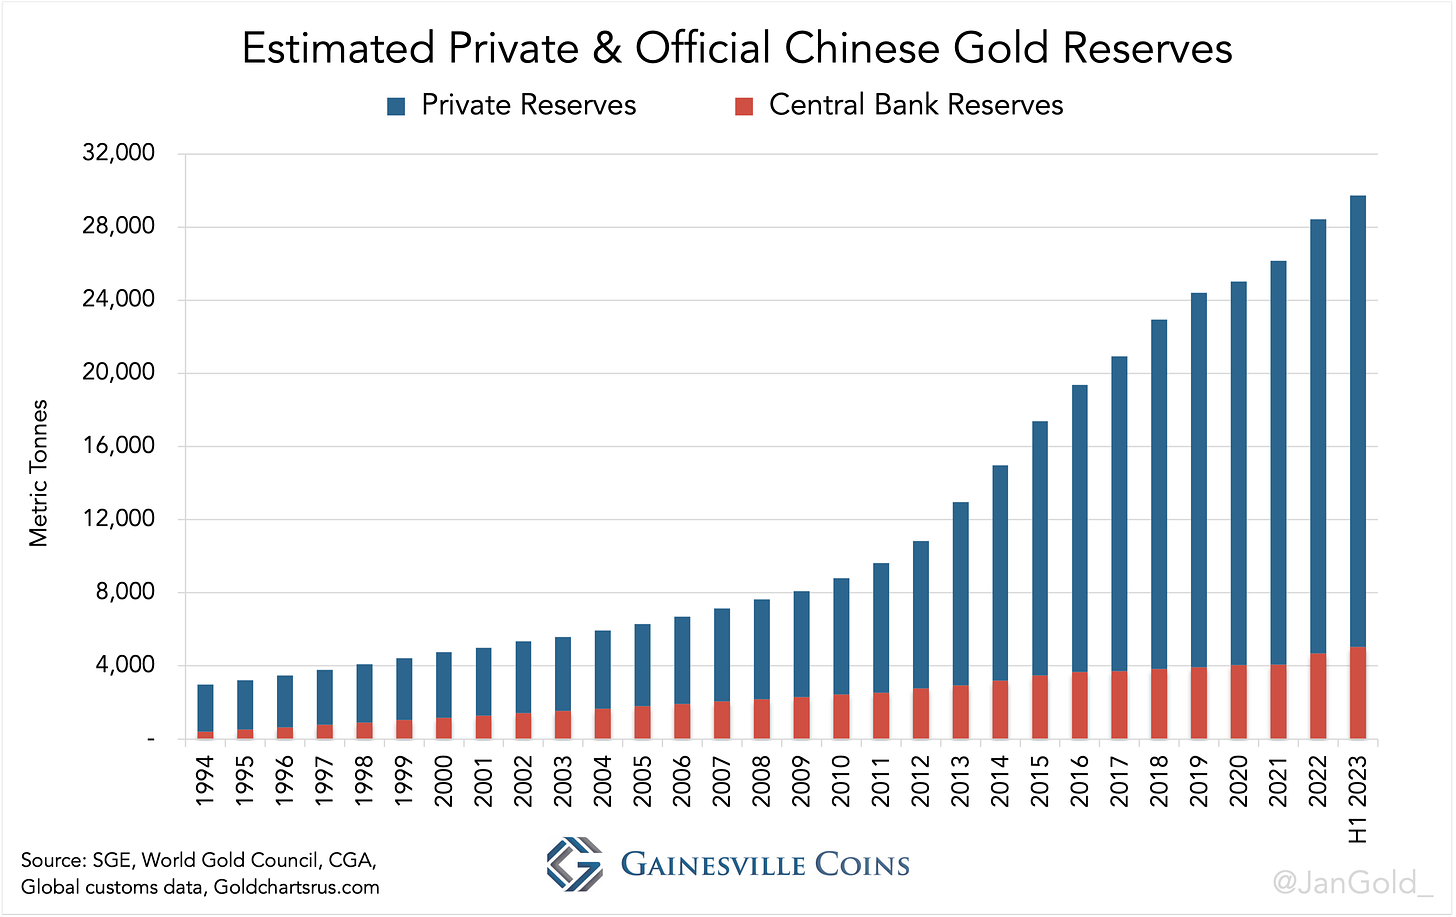 chart showing estimated private and official Chinese gold reserves